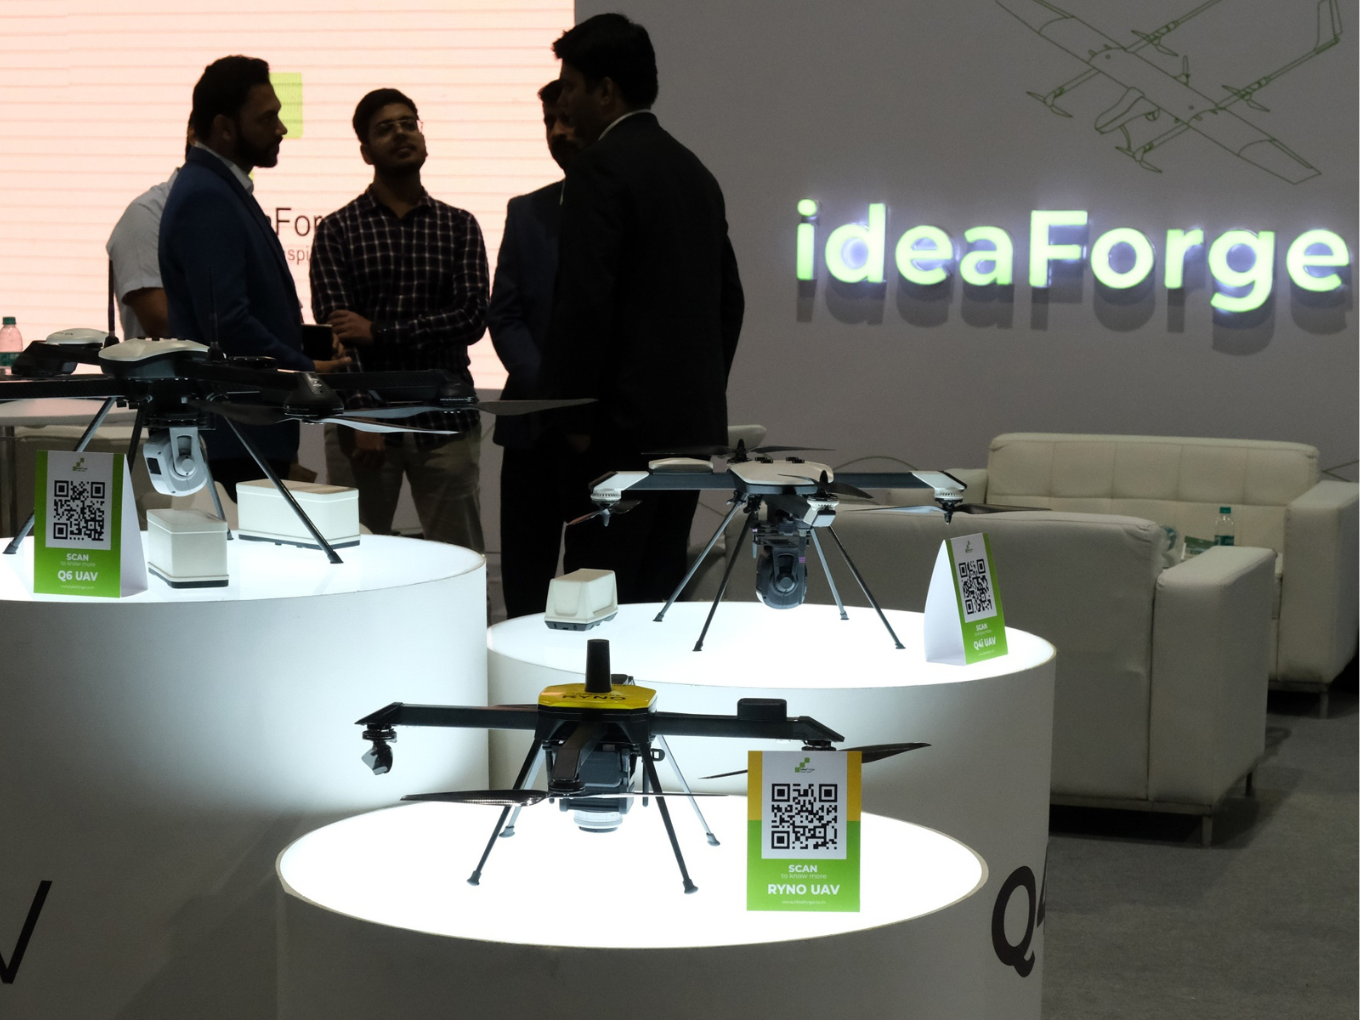 After A Spate Of EV Fires, IPO-Bound ideaForge's Drone Explodes Now